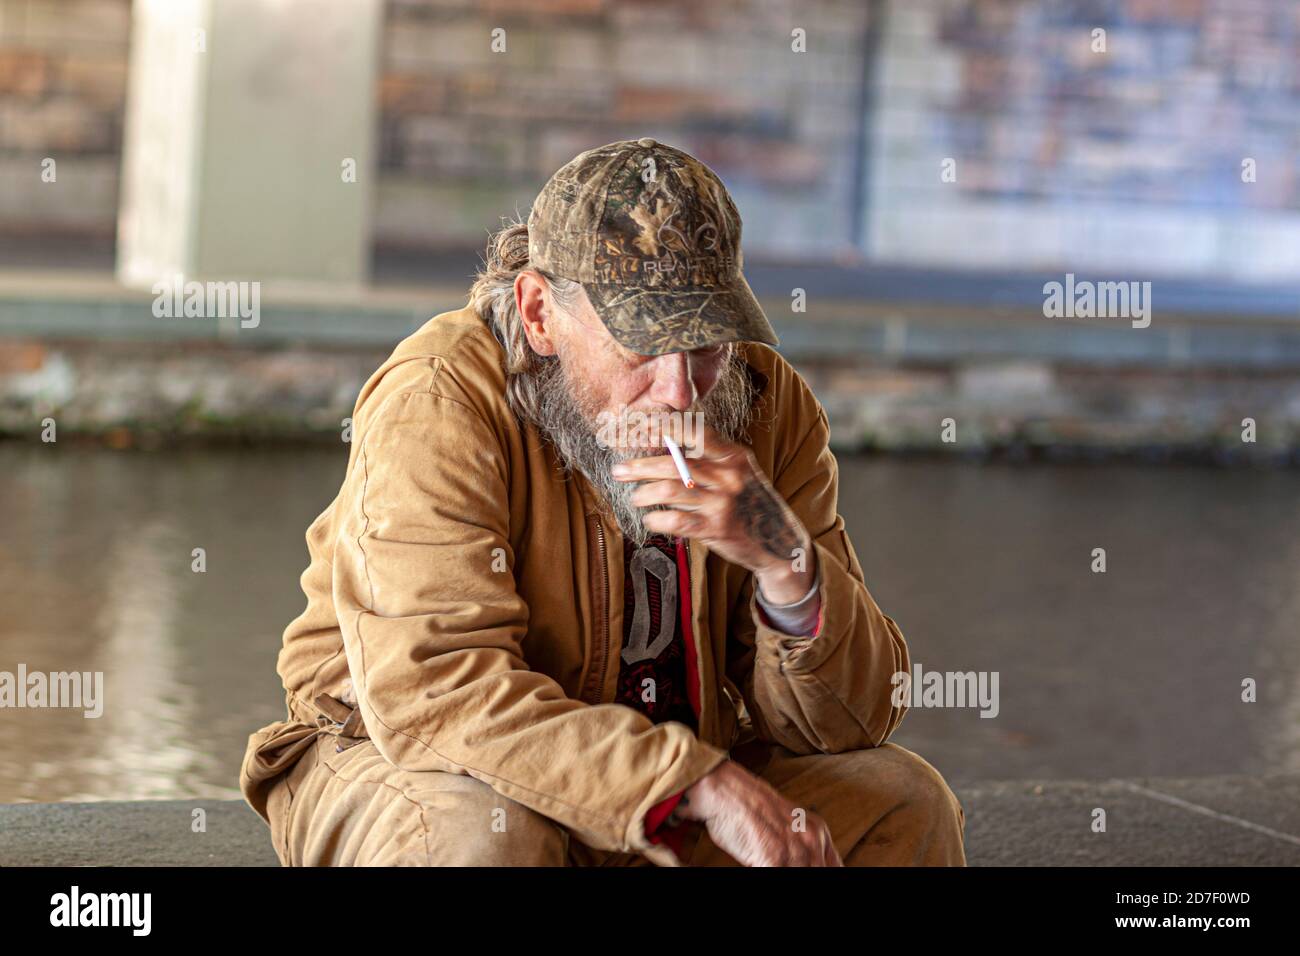 Frederick, MD, USA 10/14/2020: An elderly caucasian man with baseball hat and brown jacket is sitting by a river under bridge and smoking a cigarette. Stock Photo